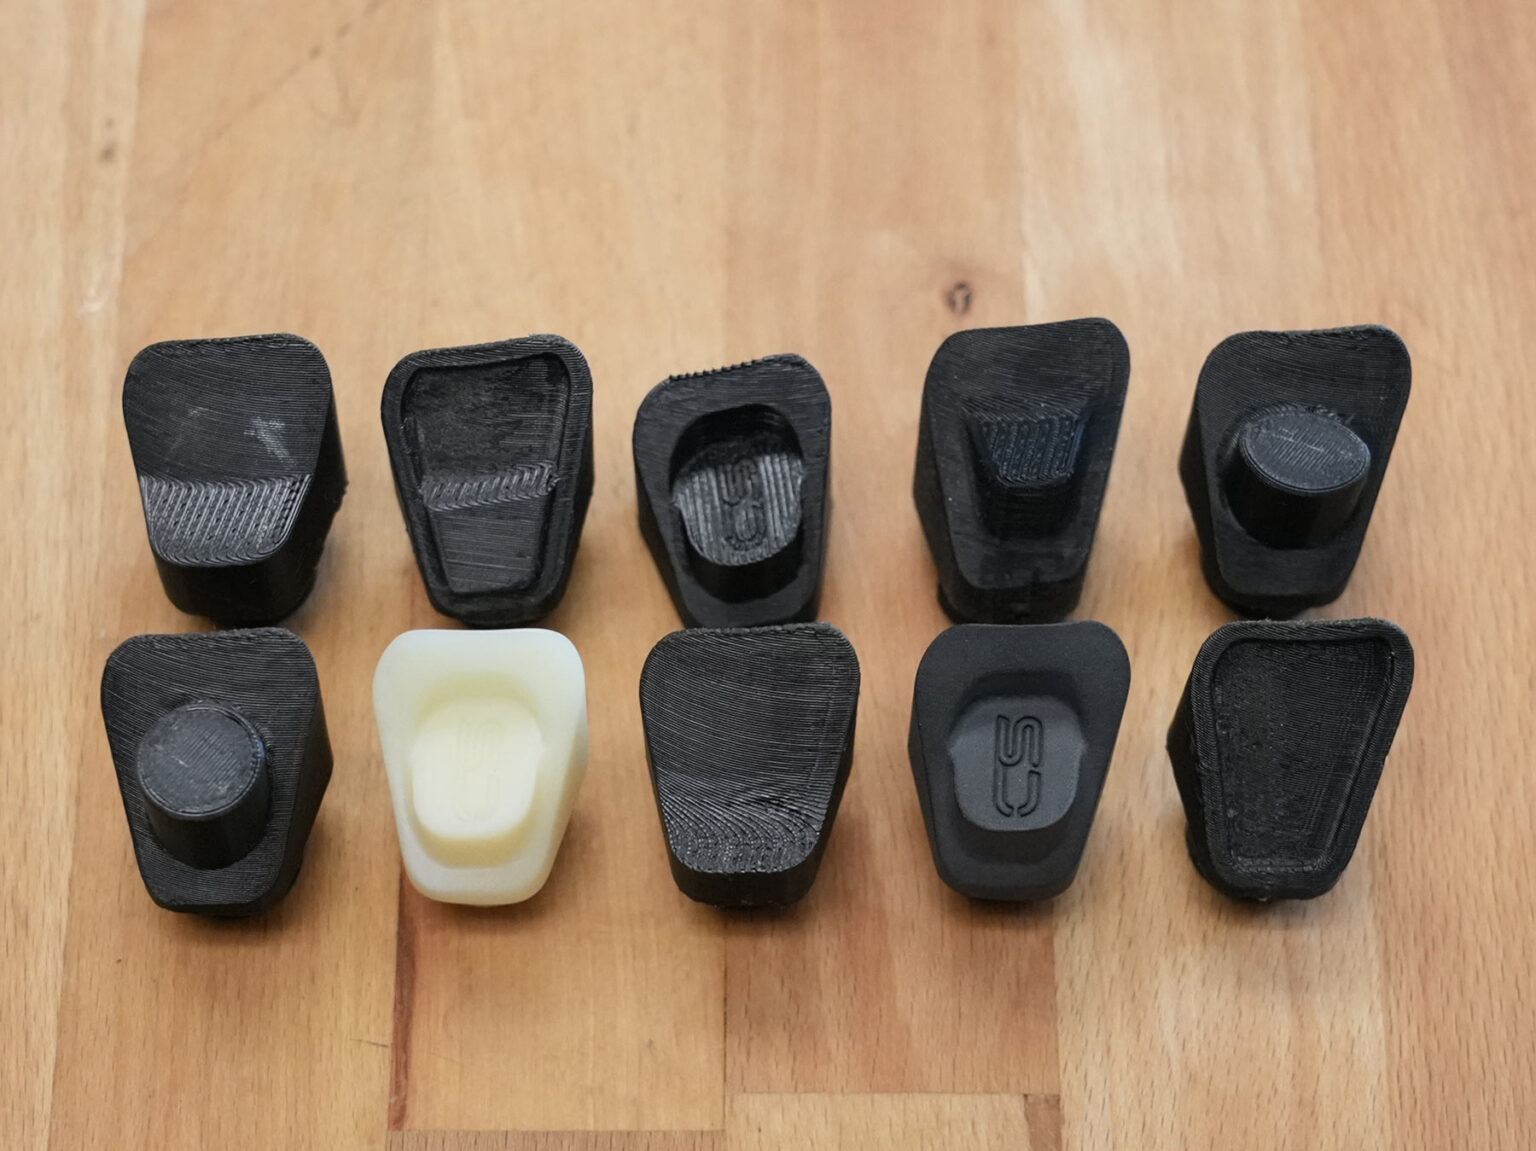 prototype climb switch buttons